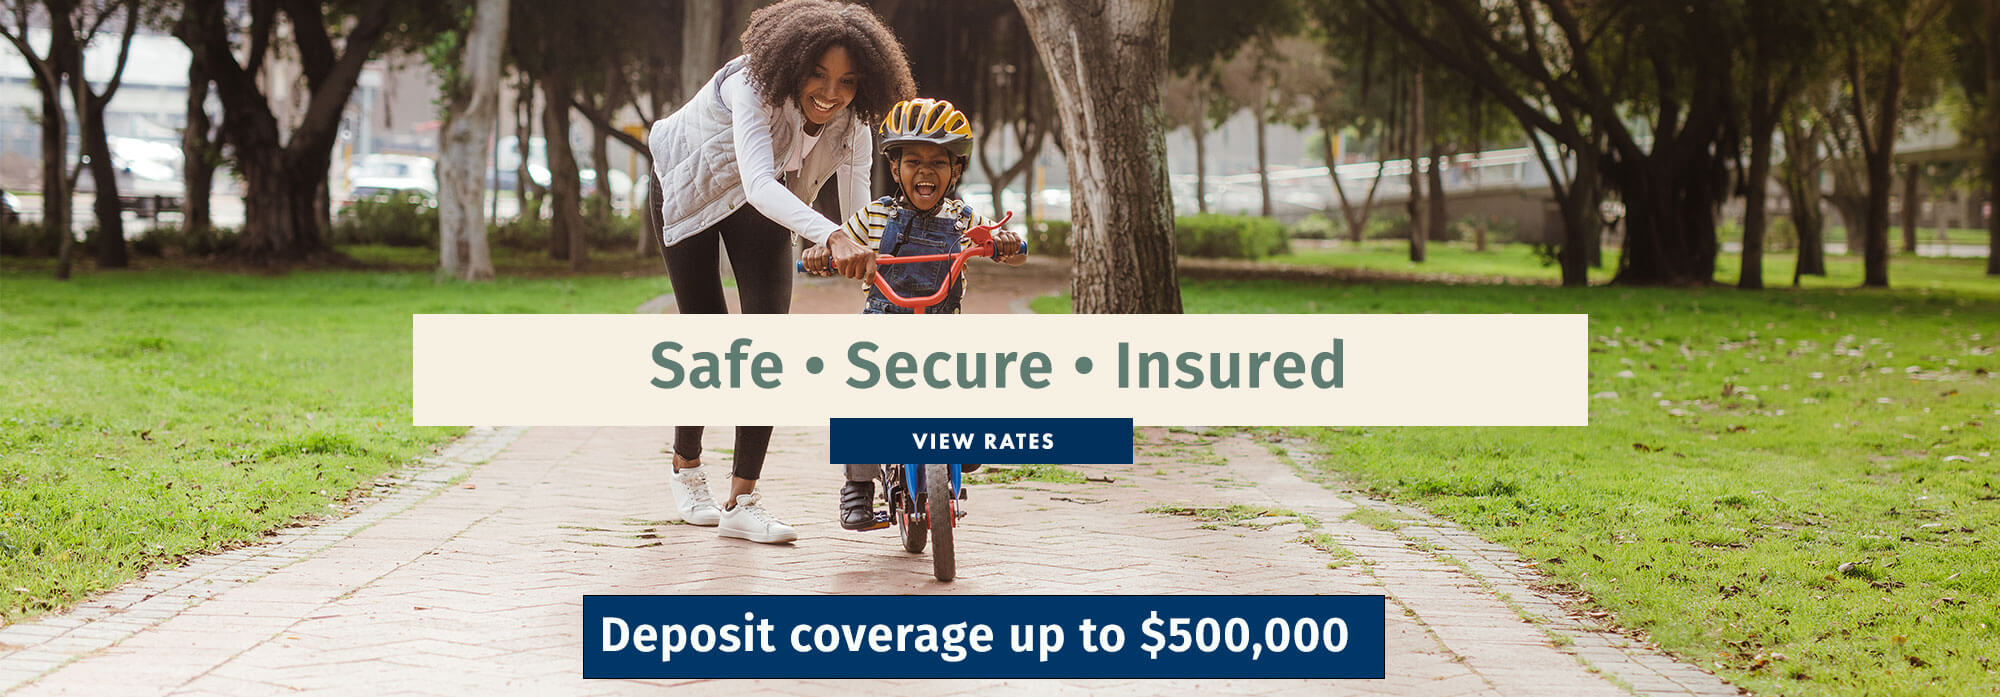 Safe - Secure - Insured View rates Deposit coverage up to $500,000